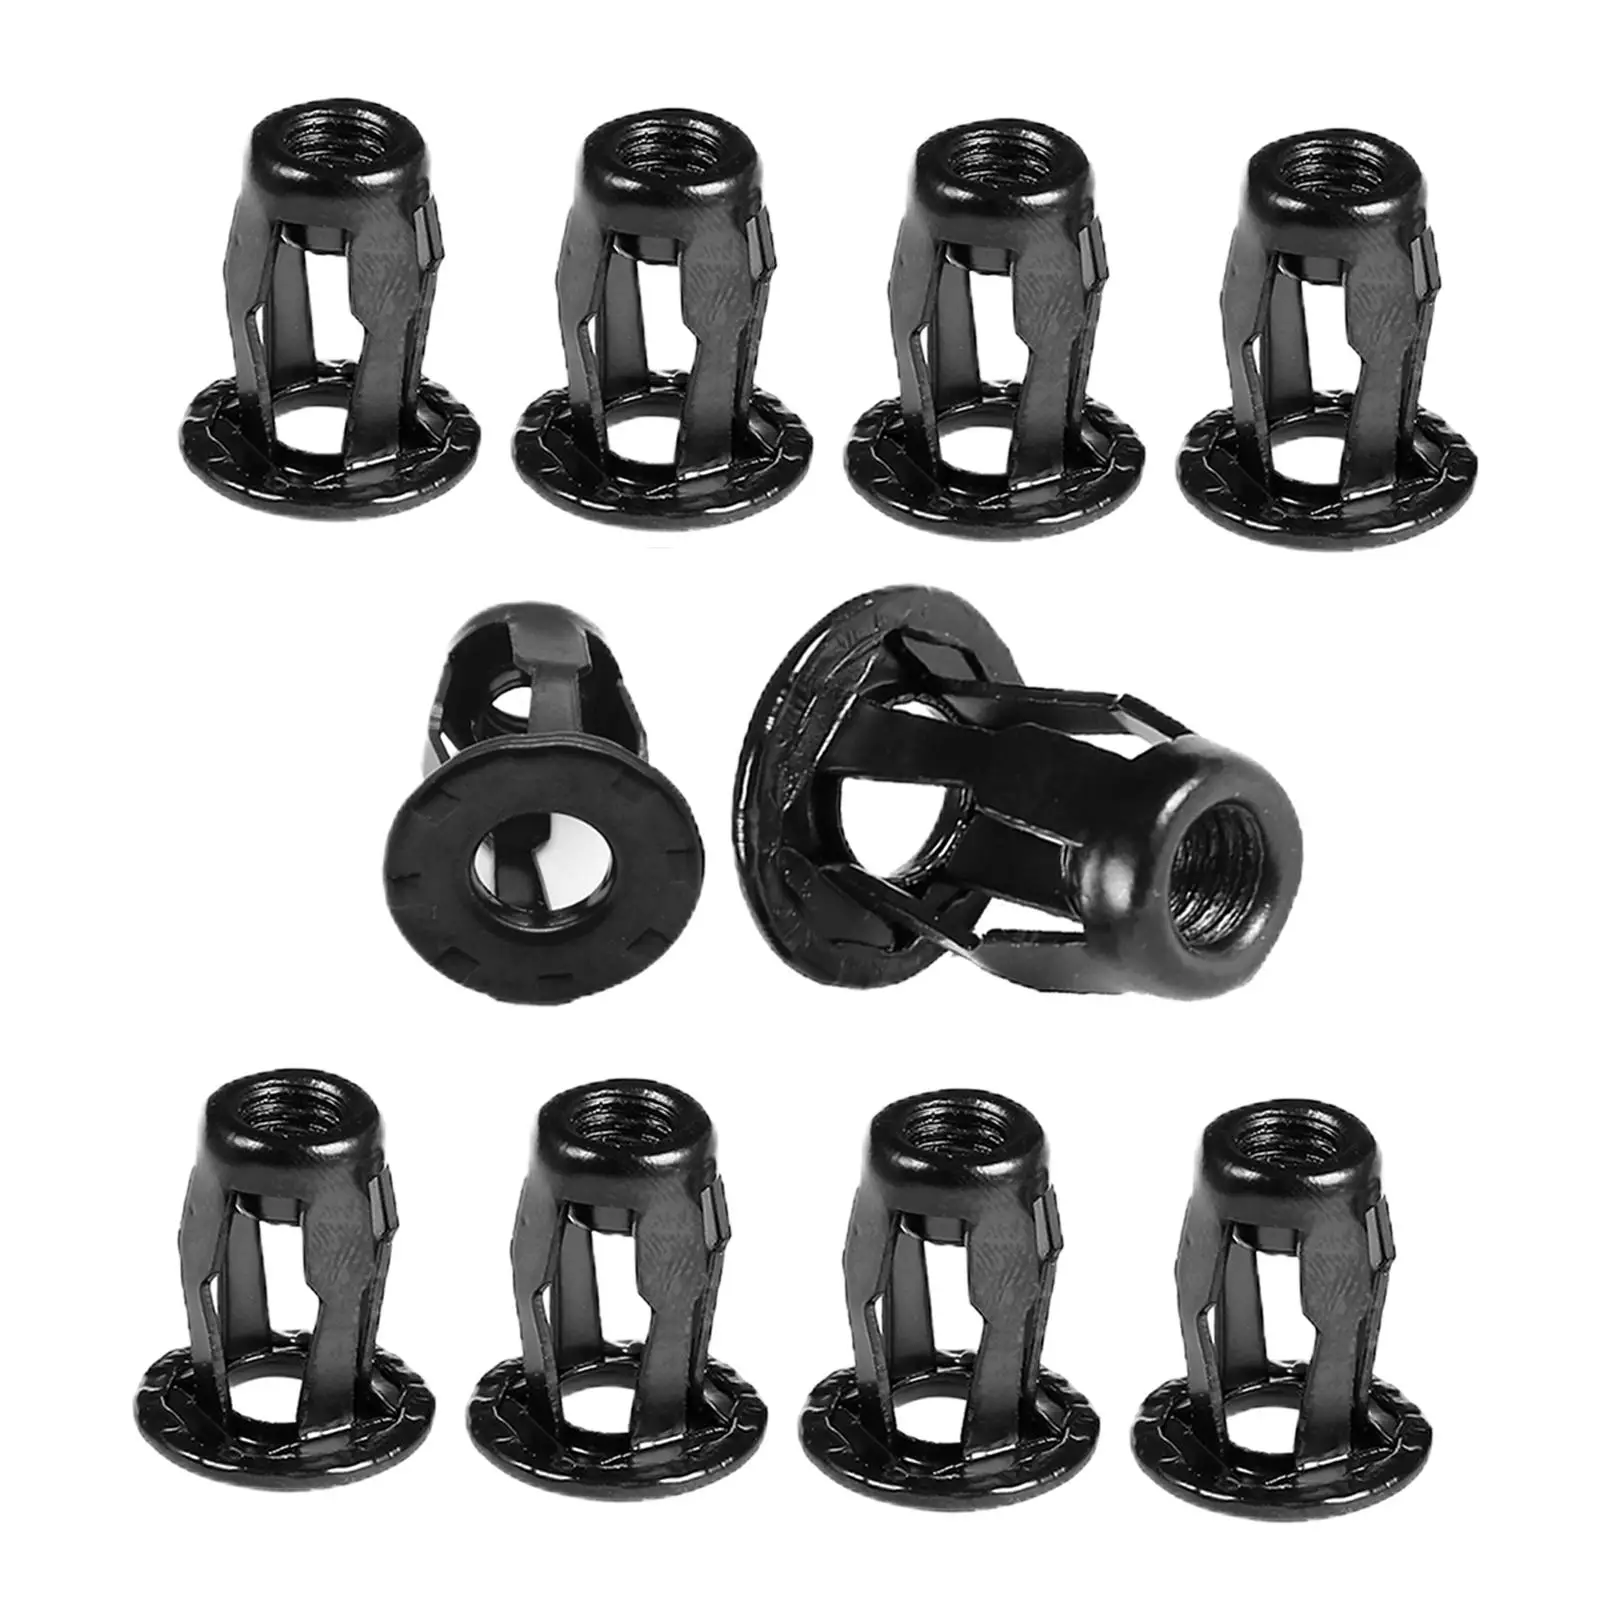 10Pcs Screw Base Clamp Trunk Nuts Spare Parts License Plate Fastener Clips Fit for Audi